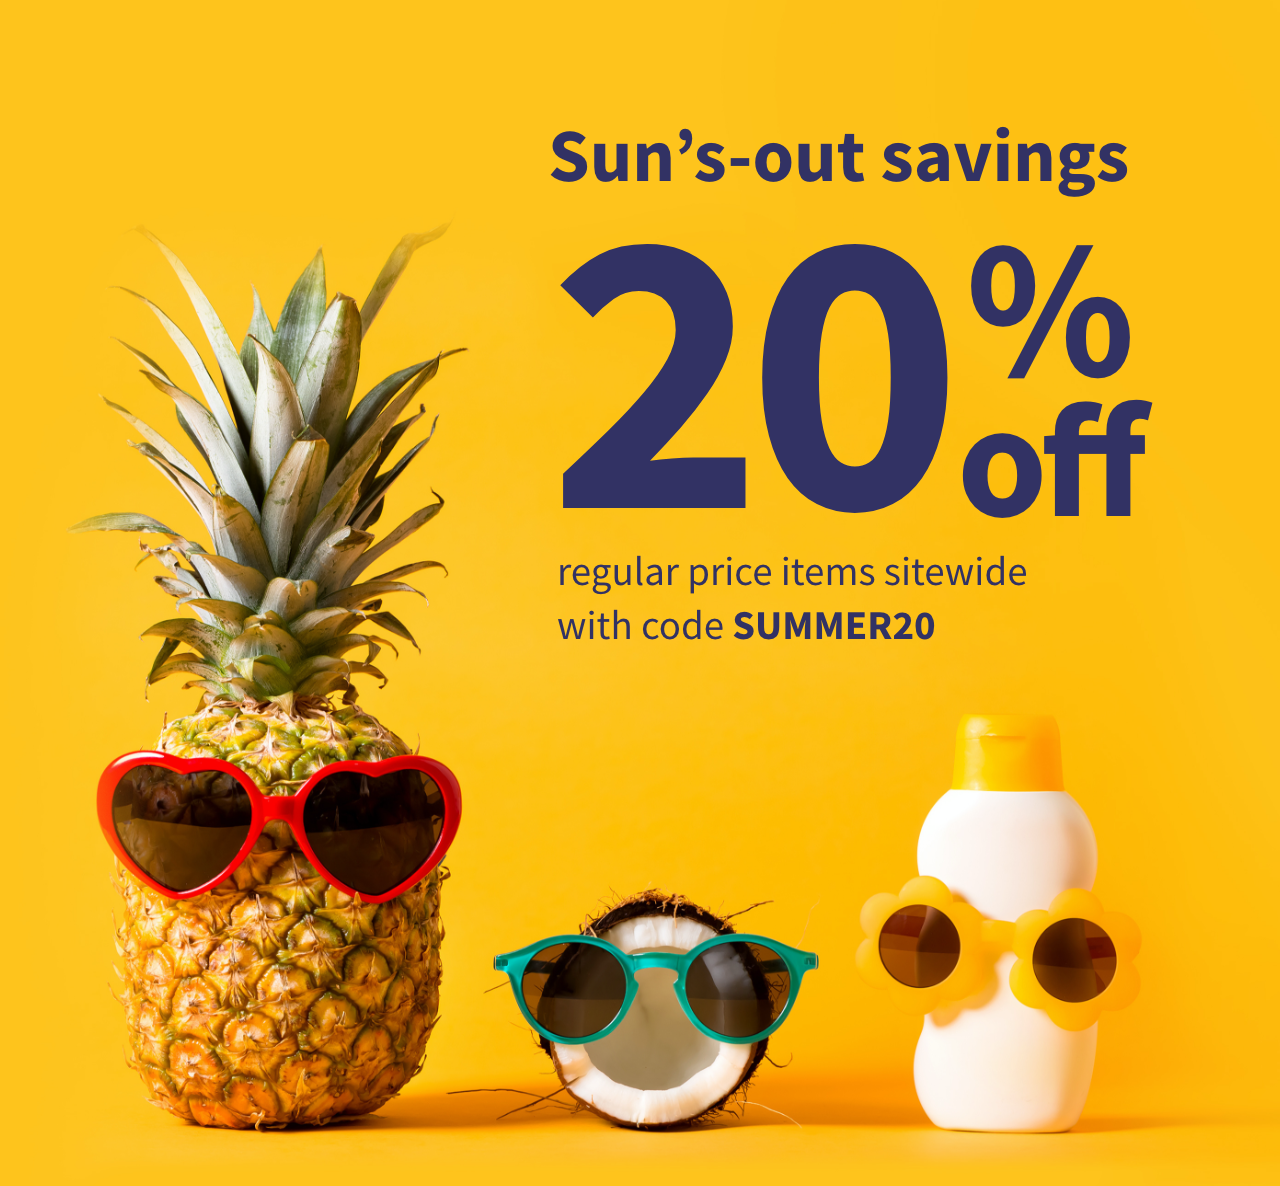 Sun's-out savings. 20% off regular price items sitewide with code SUMMER20